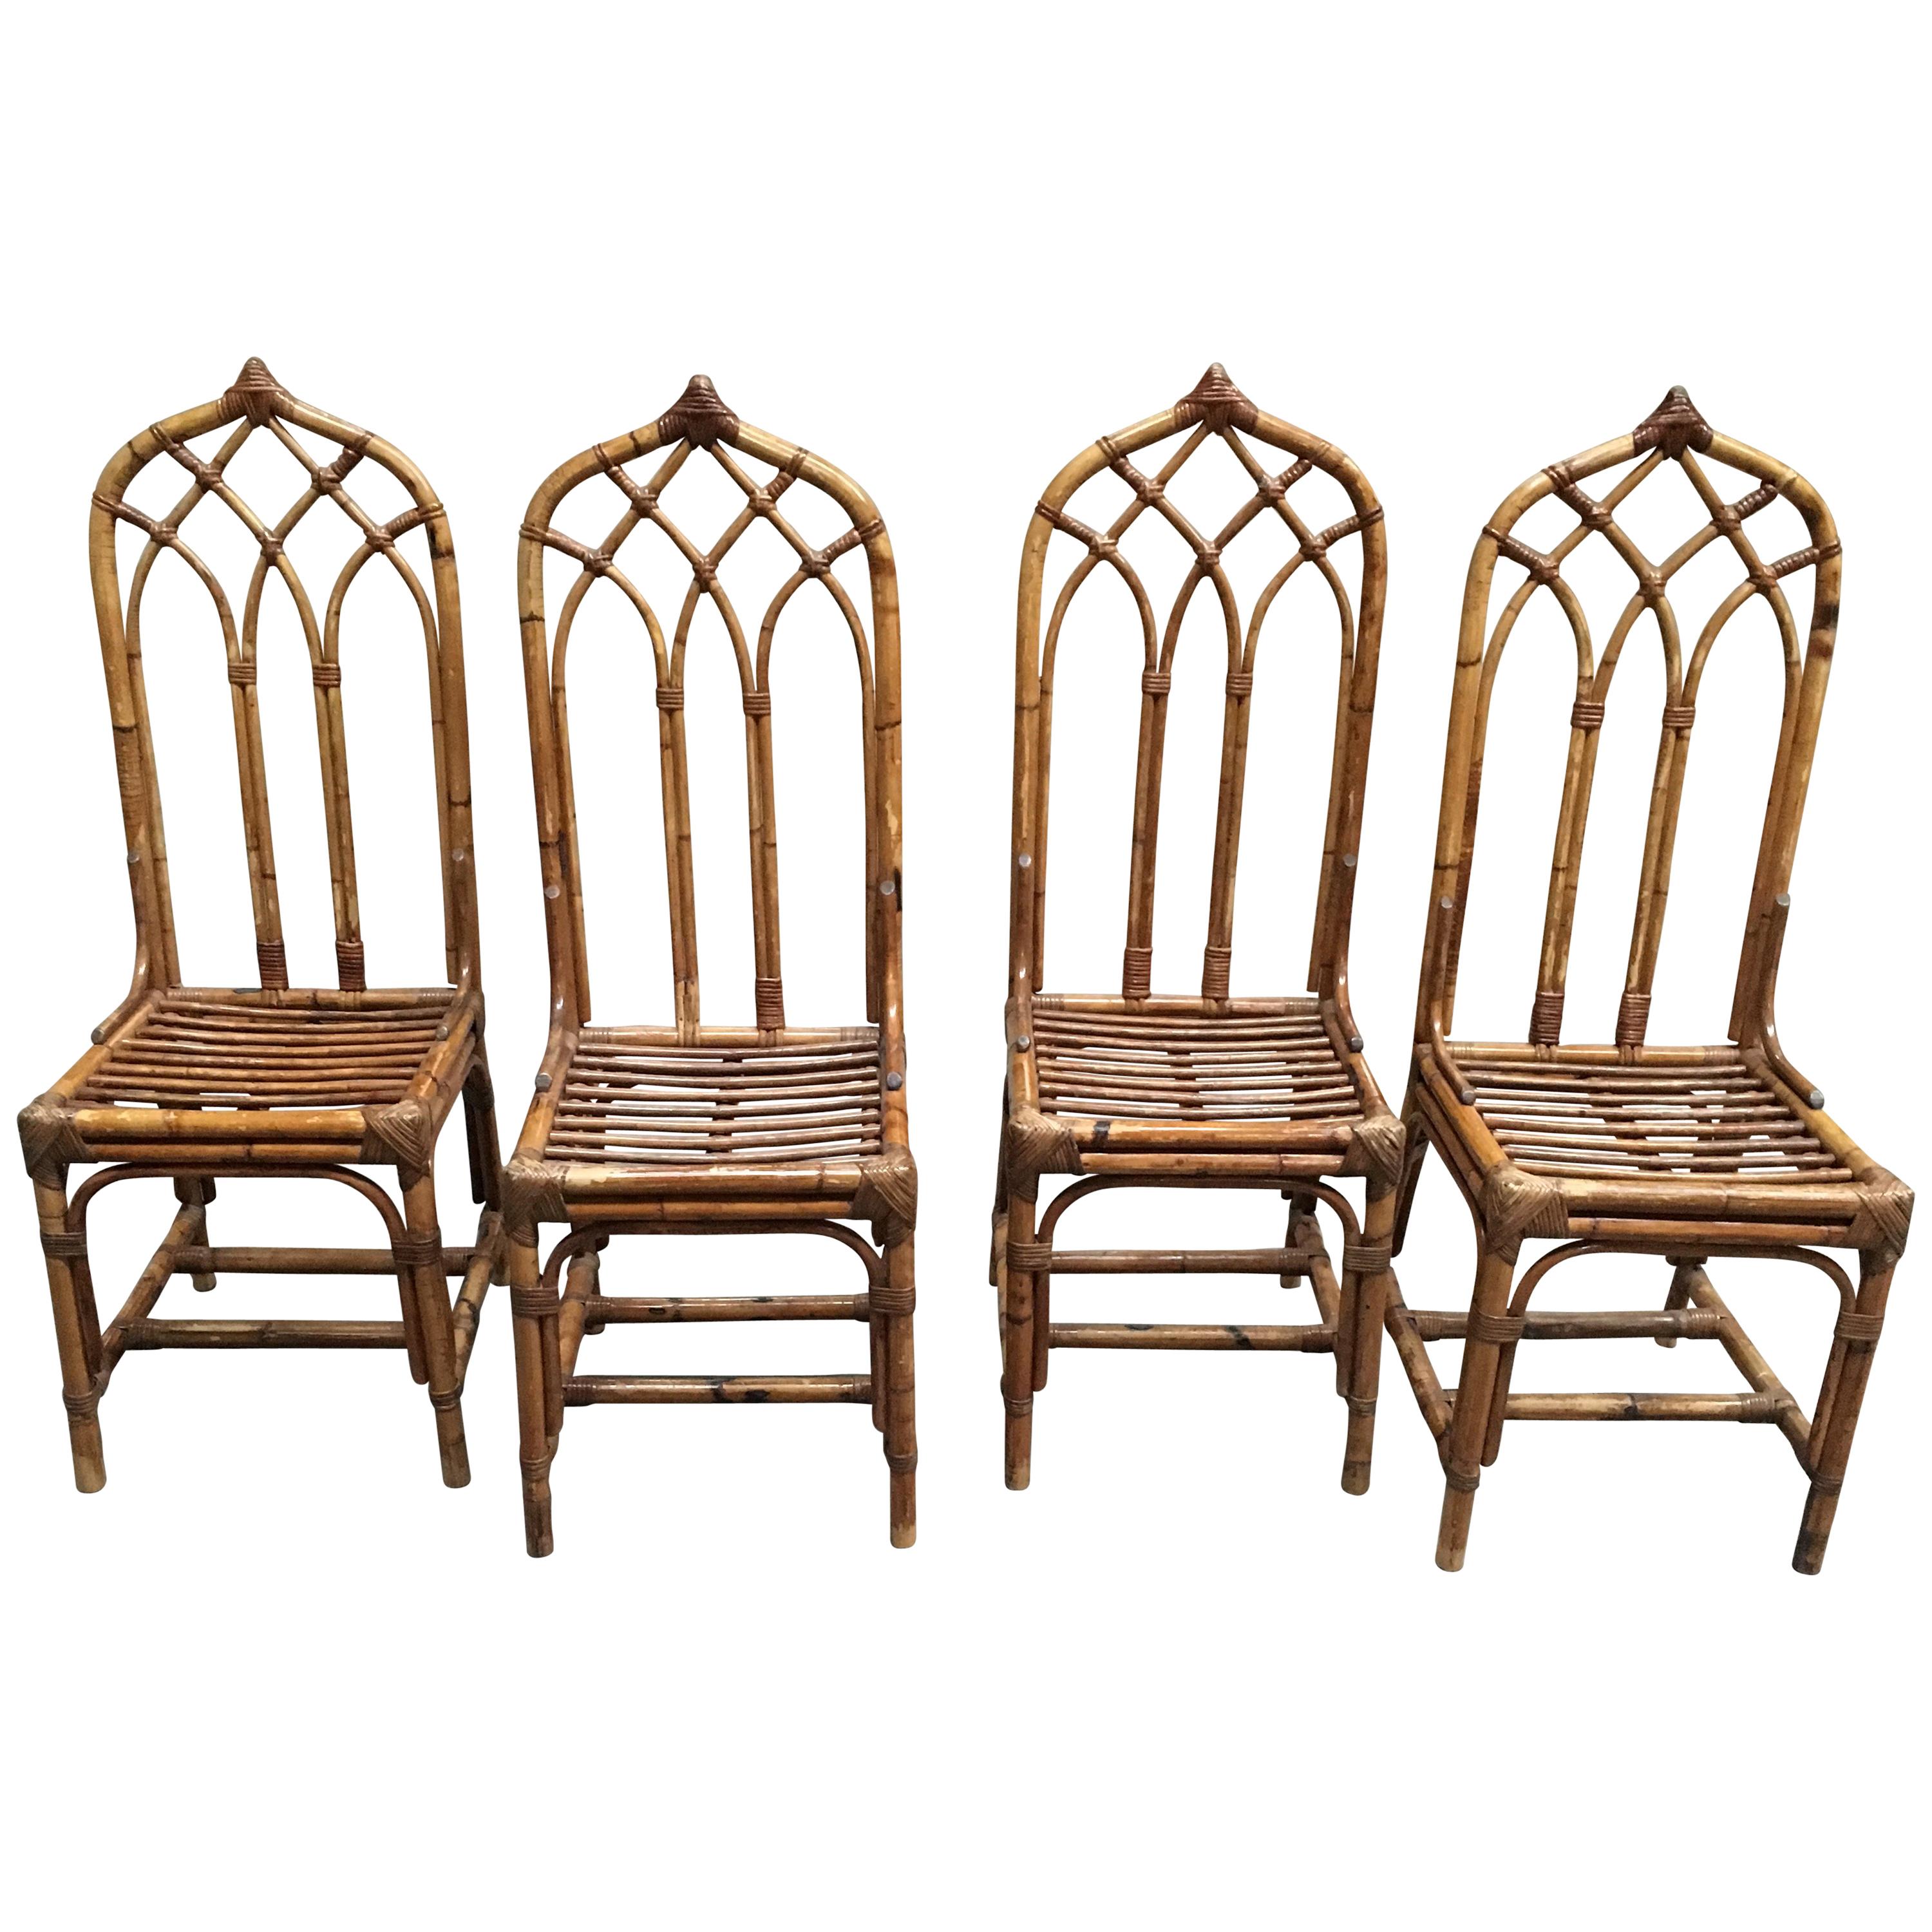 Mid-Century Modern Italian Set of Bamboo and Rattan Regency Style Chairs, 1960s